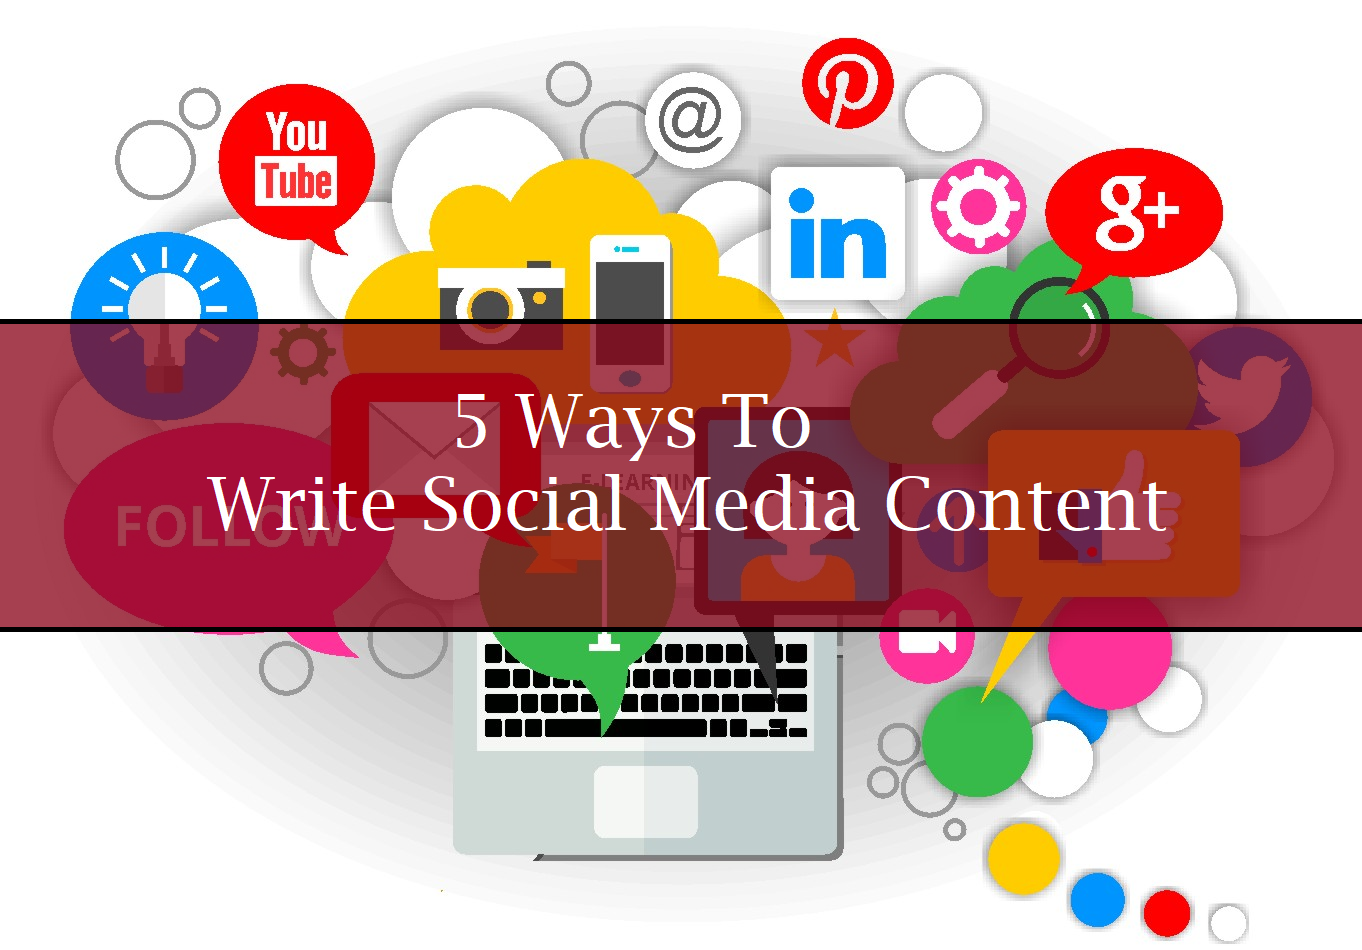 5 Ways to Write Social Media Content